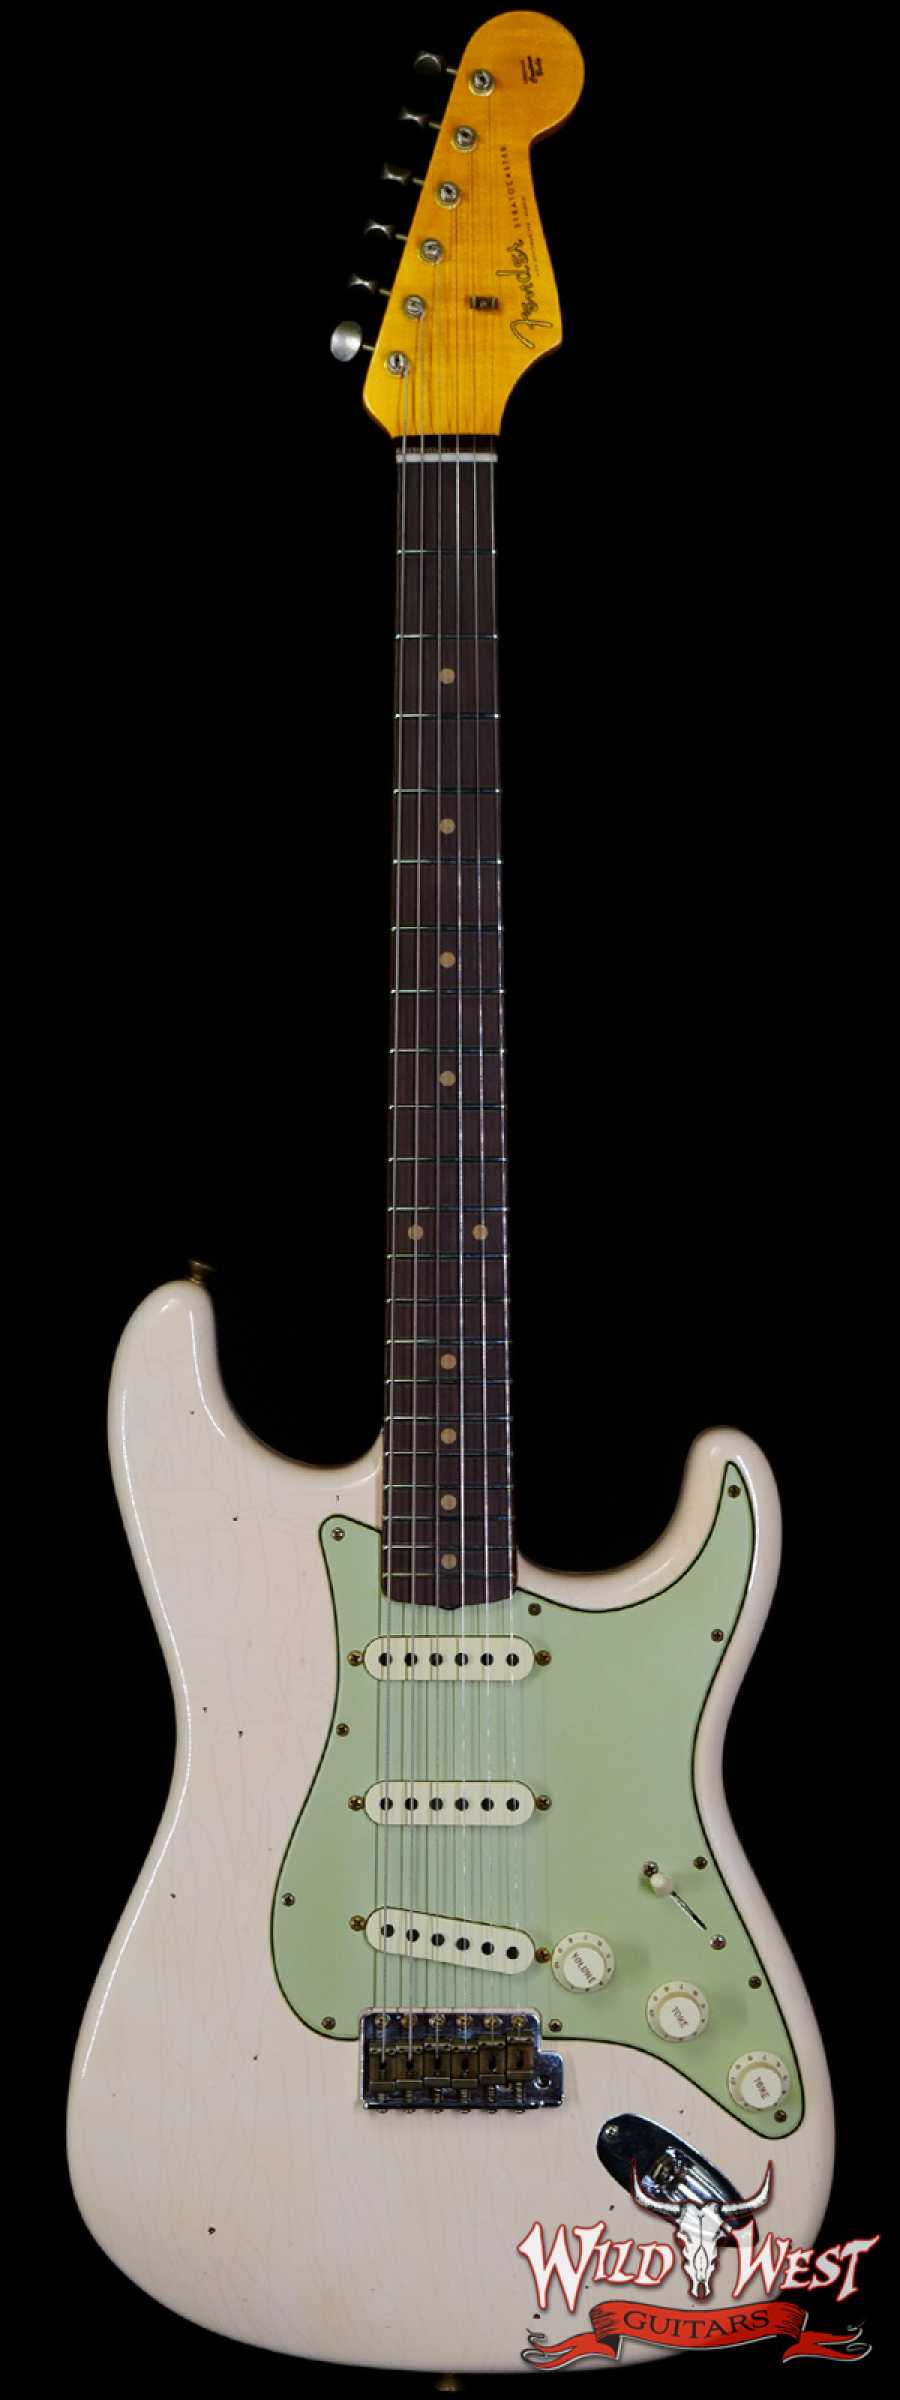 Wild　Stratocaster　Guitars　Pink　Edition　Shop　Custom　Relic　Faded　Shell　Aged　1960　West　Journeyman　Super　Fender　Limited